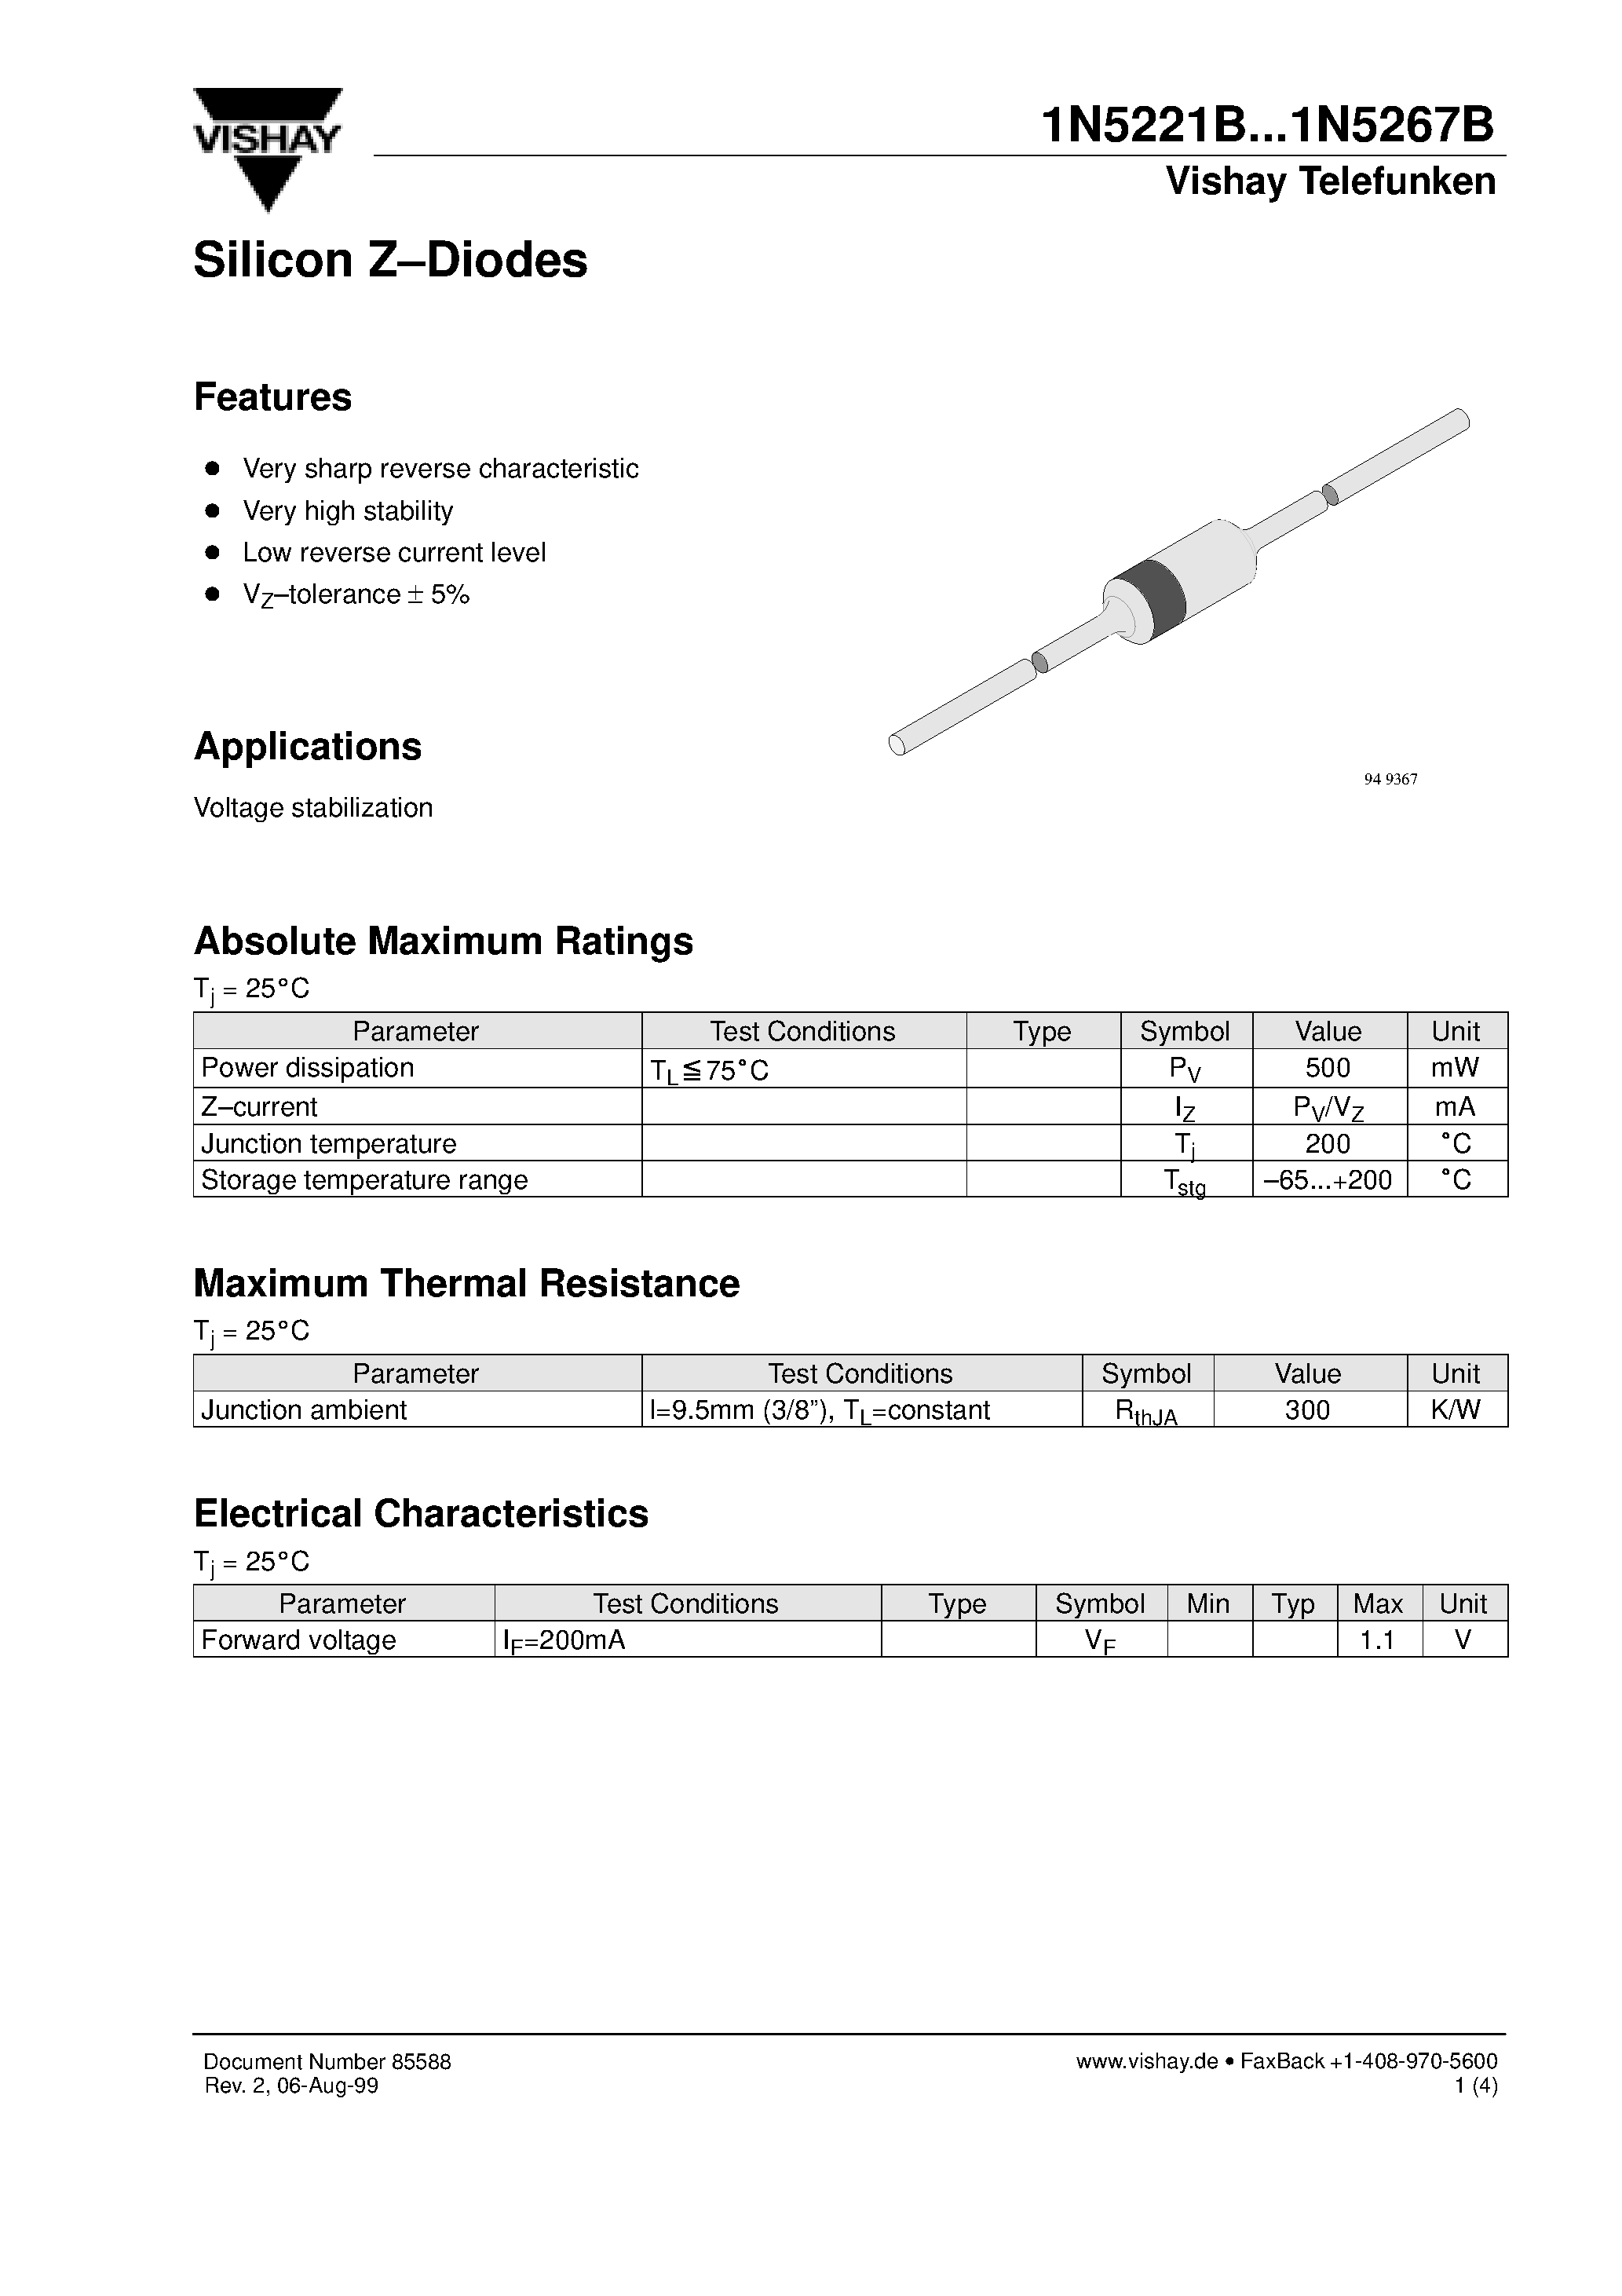 Datasheet 1N5222B - Silicon Z-Diodes page 1